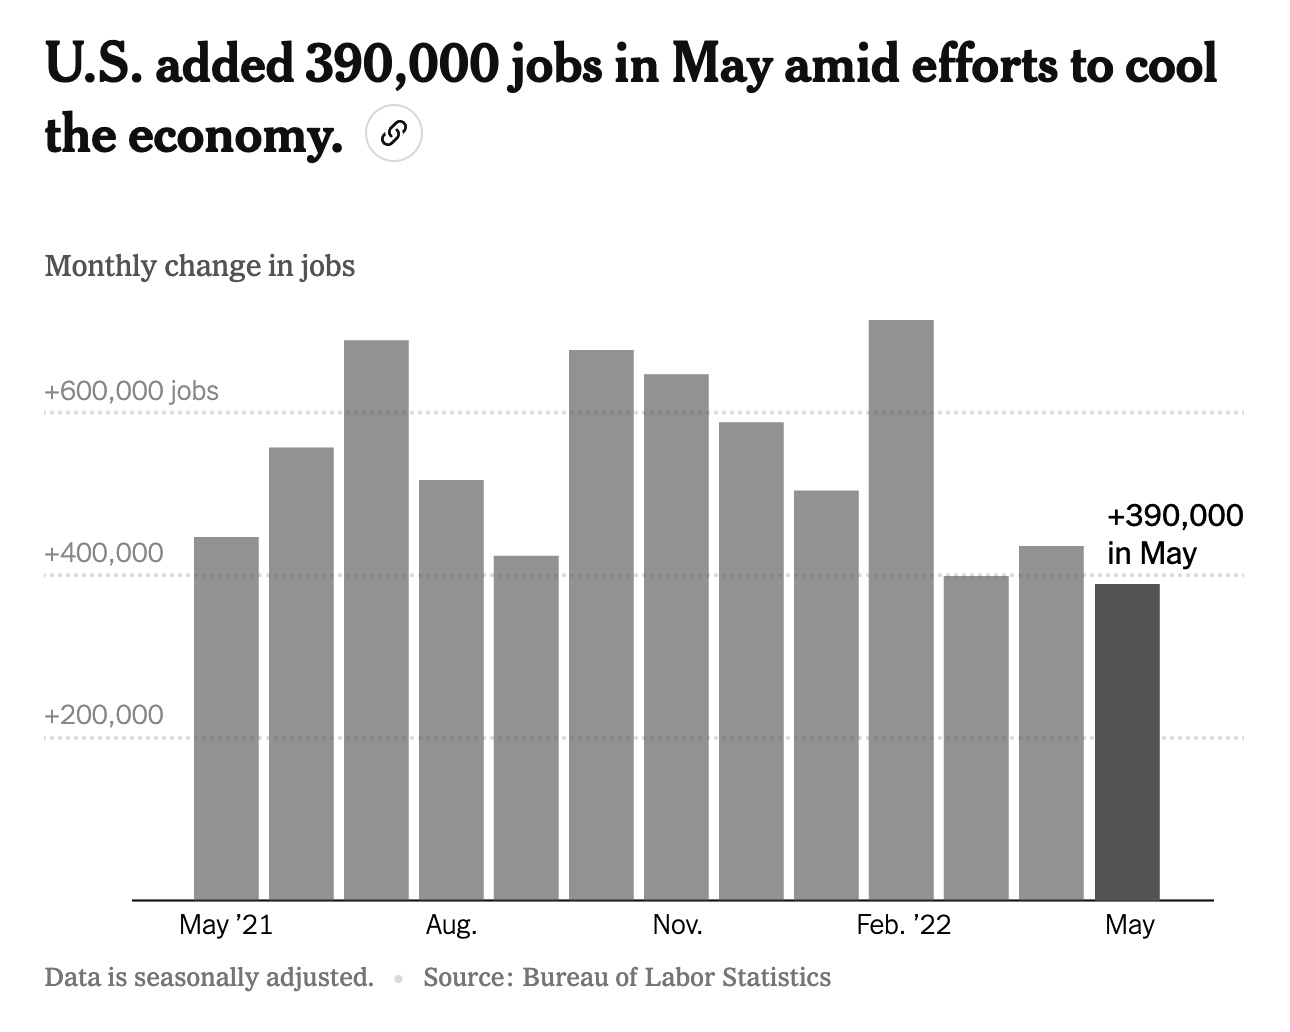 Jobs in May 2022